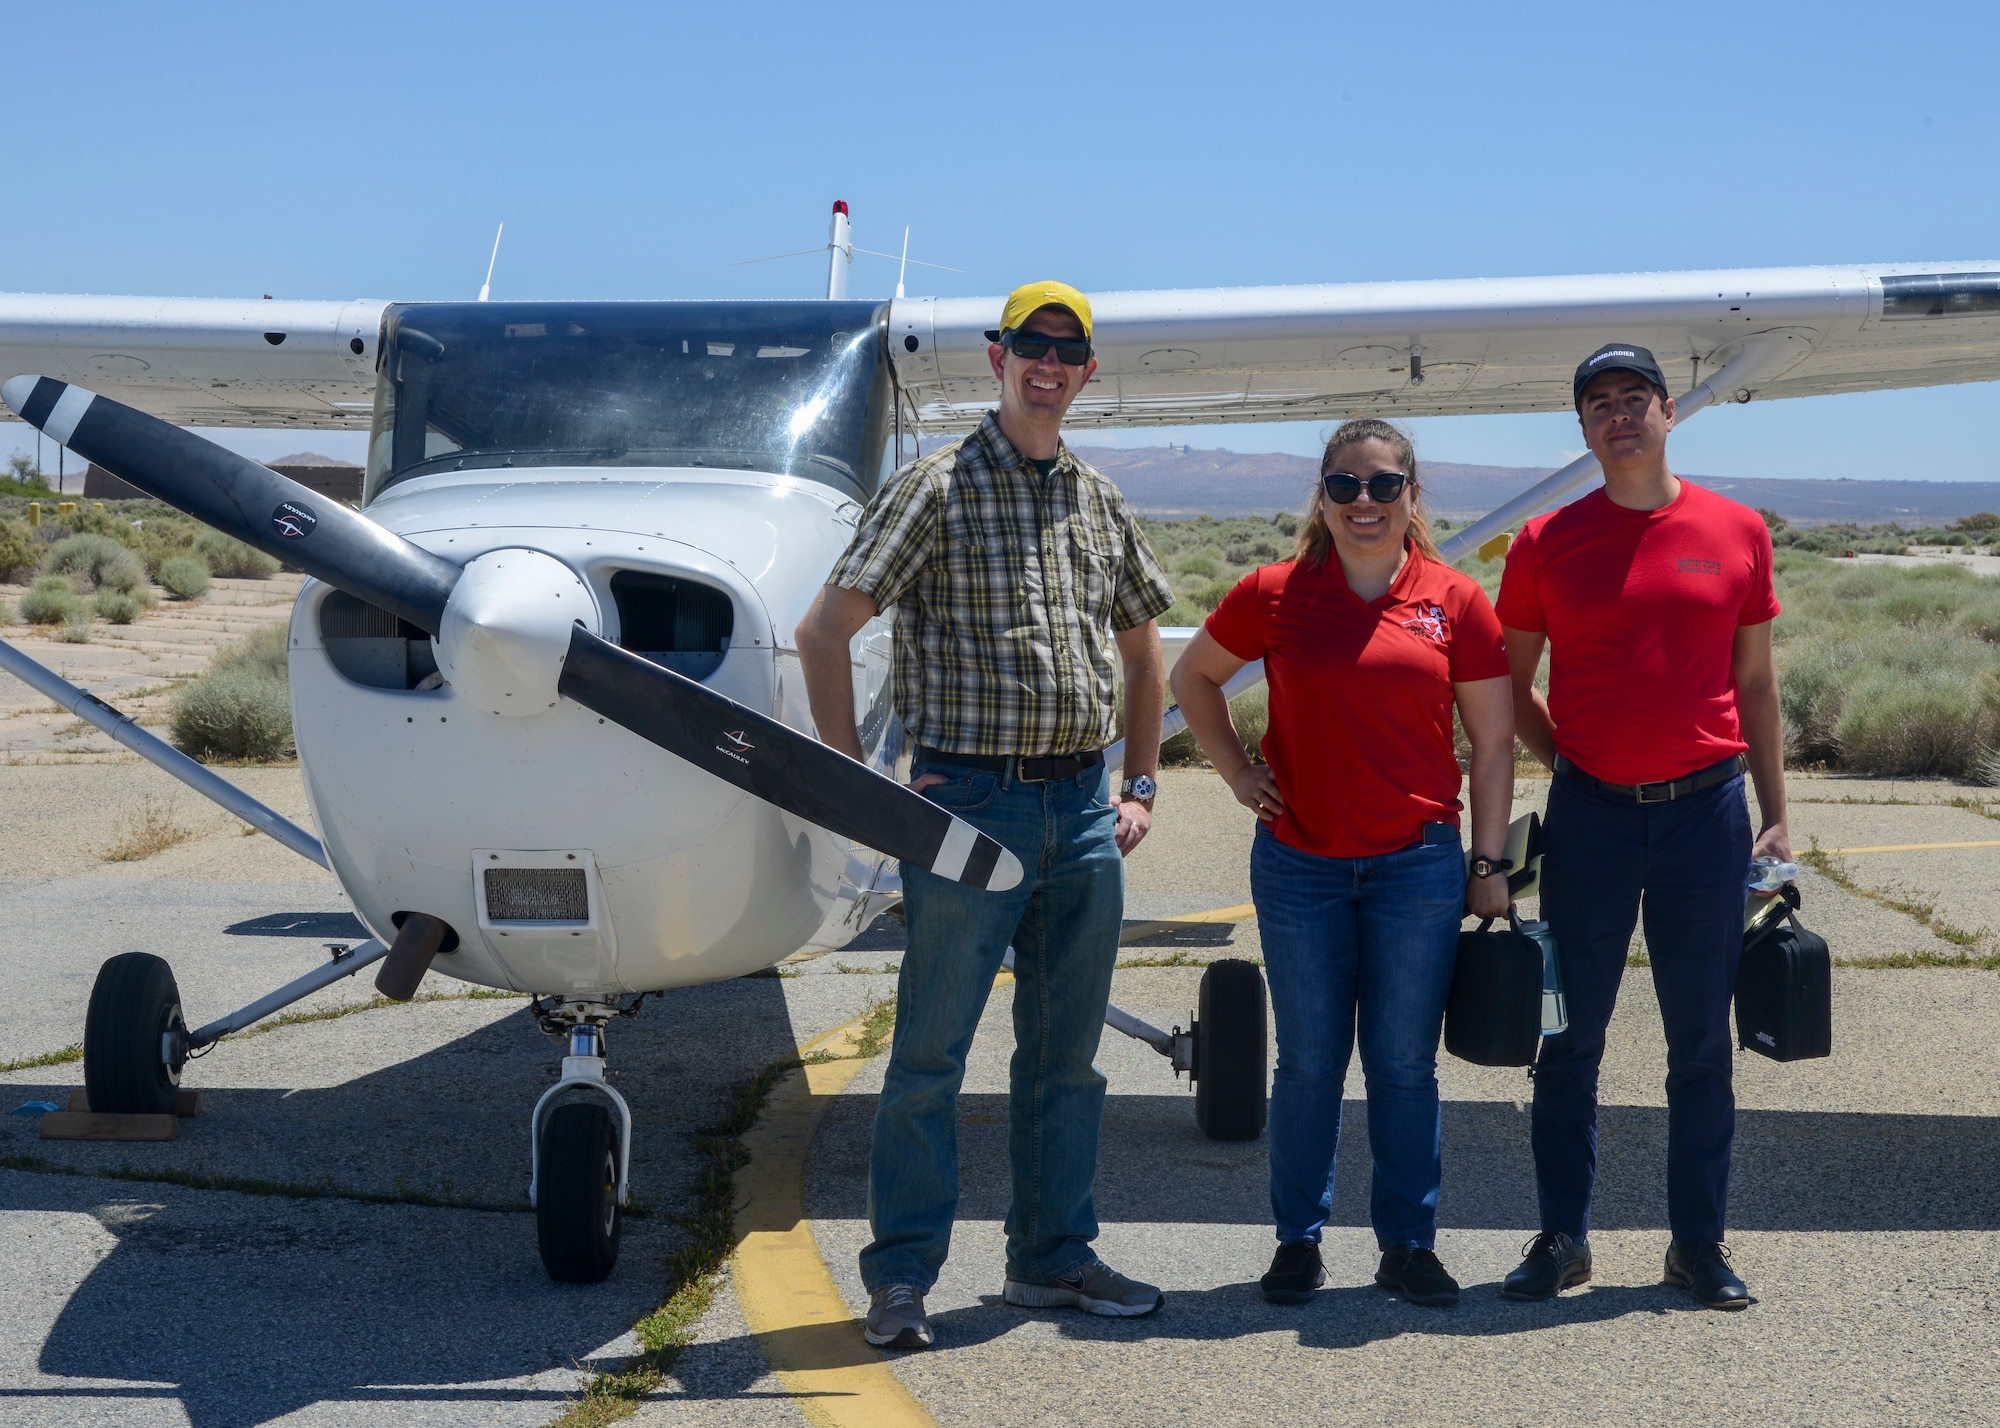 Chris Liebmann, 773rd Test Squadron, Aero Club pilot, Chloe Angulo, 771st TS, and David Cortes, 775th TS, pose for a photo with a Cessna 172 airplane following their inaugural Airmanship flight at the Aero Club on Edwards Air Force Base, Calif., May 24. (U.S. Air Force photo by Giancarlo Casem)